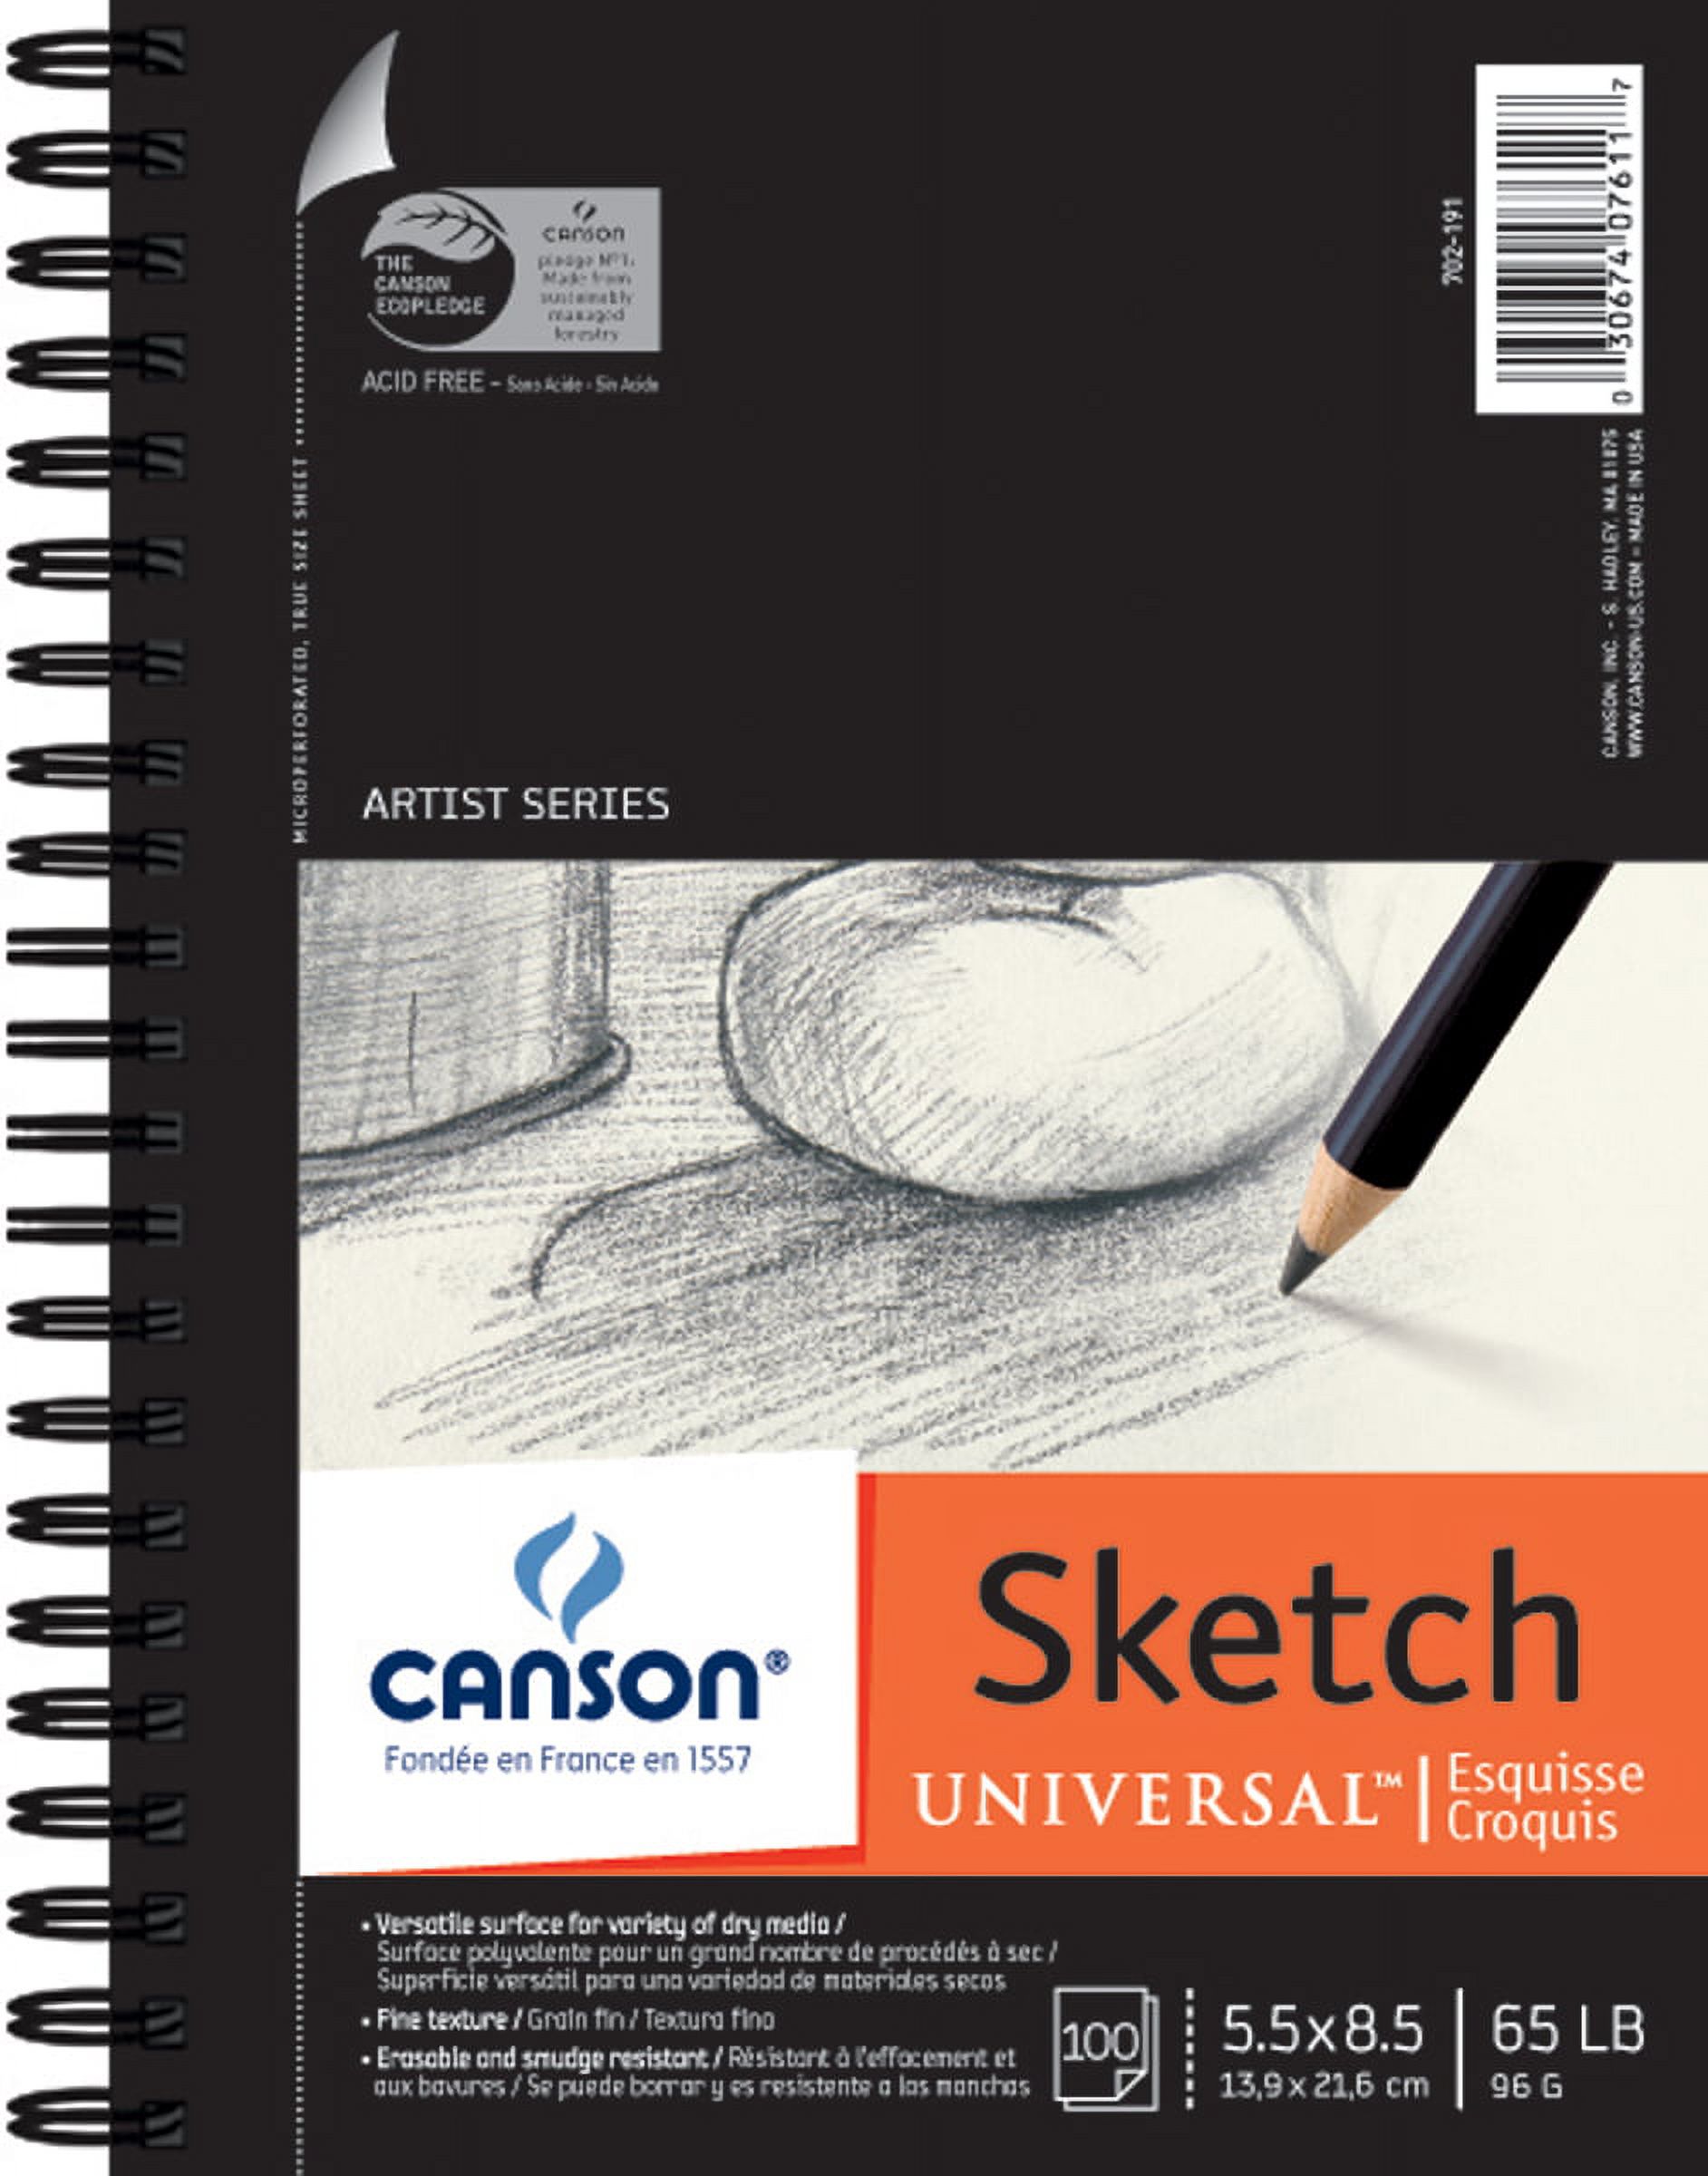 Canson Universal Sketch Paper Pad 5.5 x 8.5 ": 100 Sheets - image 2 of 2